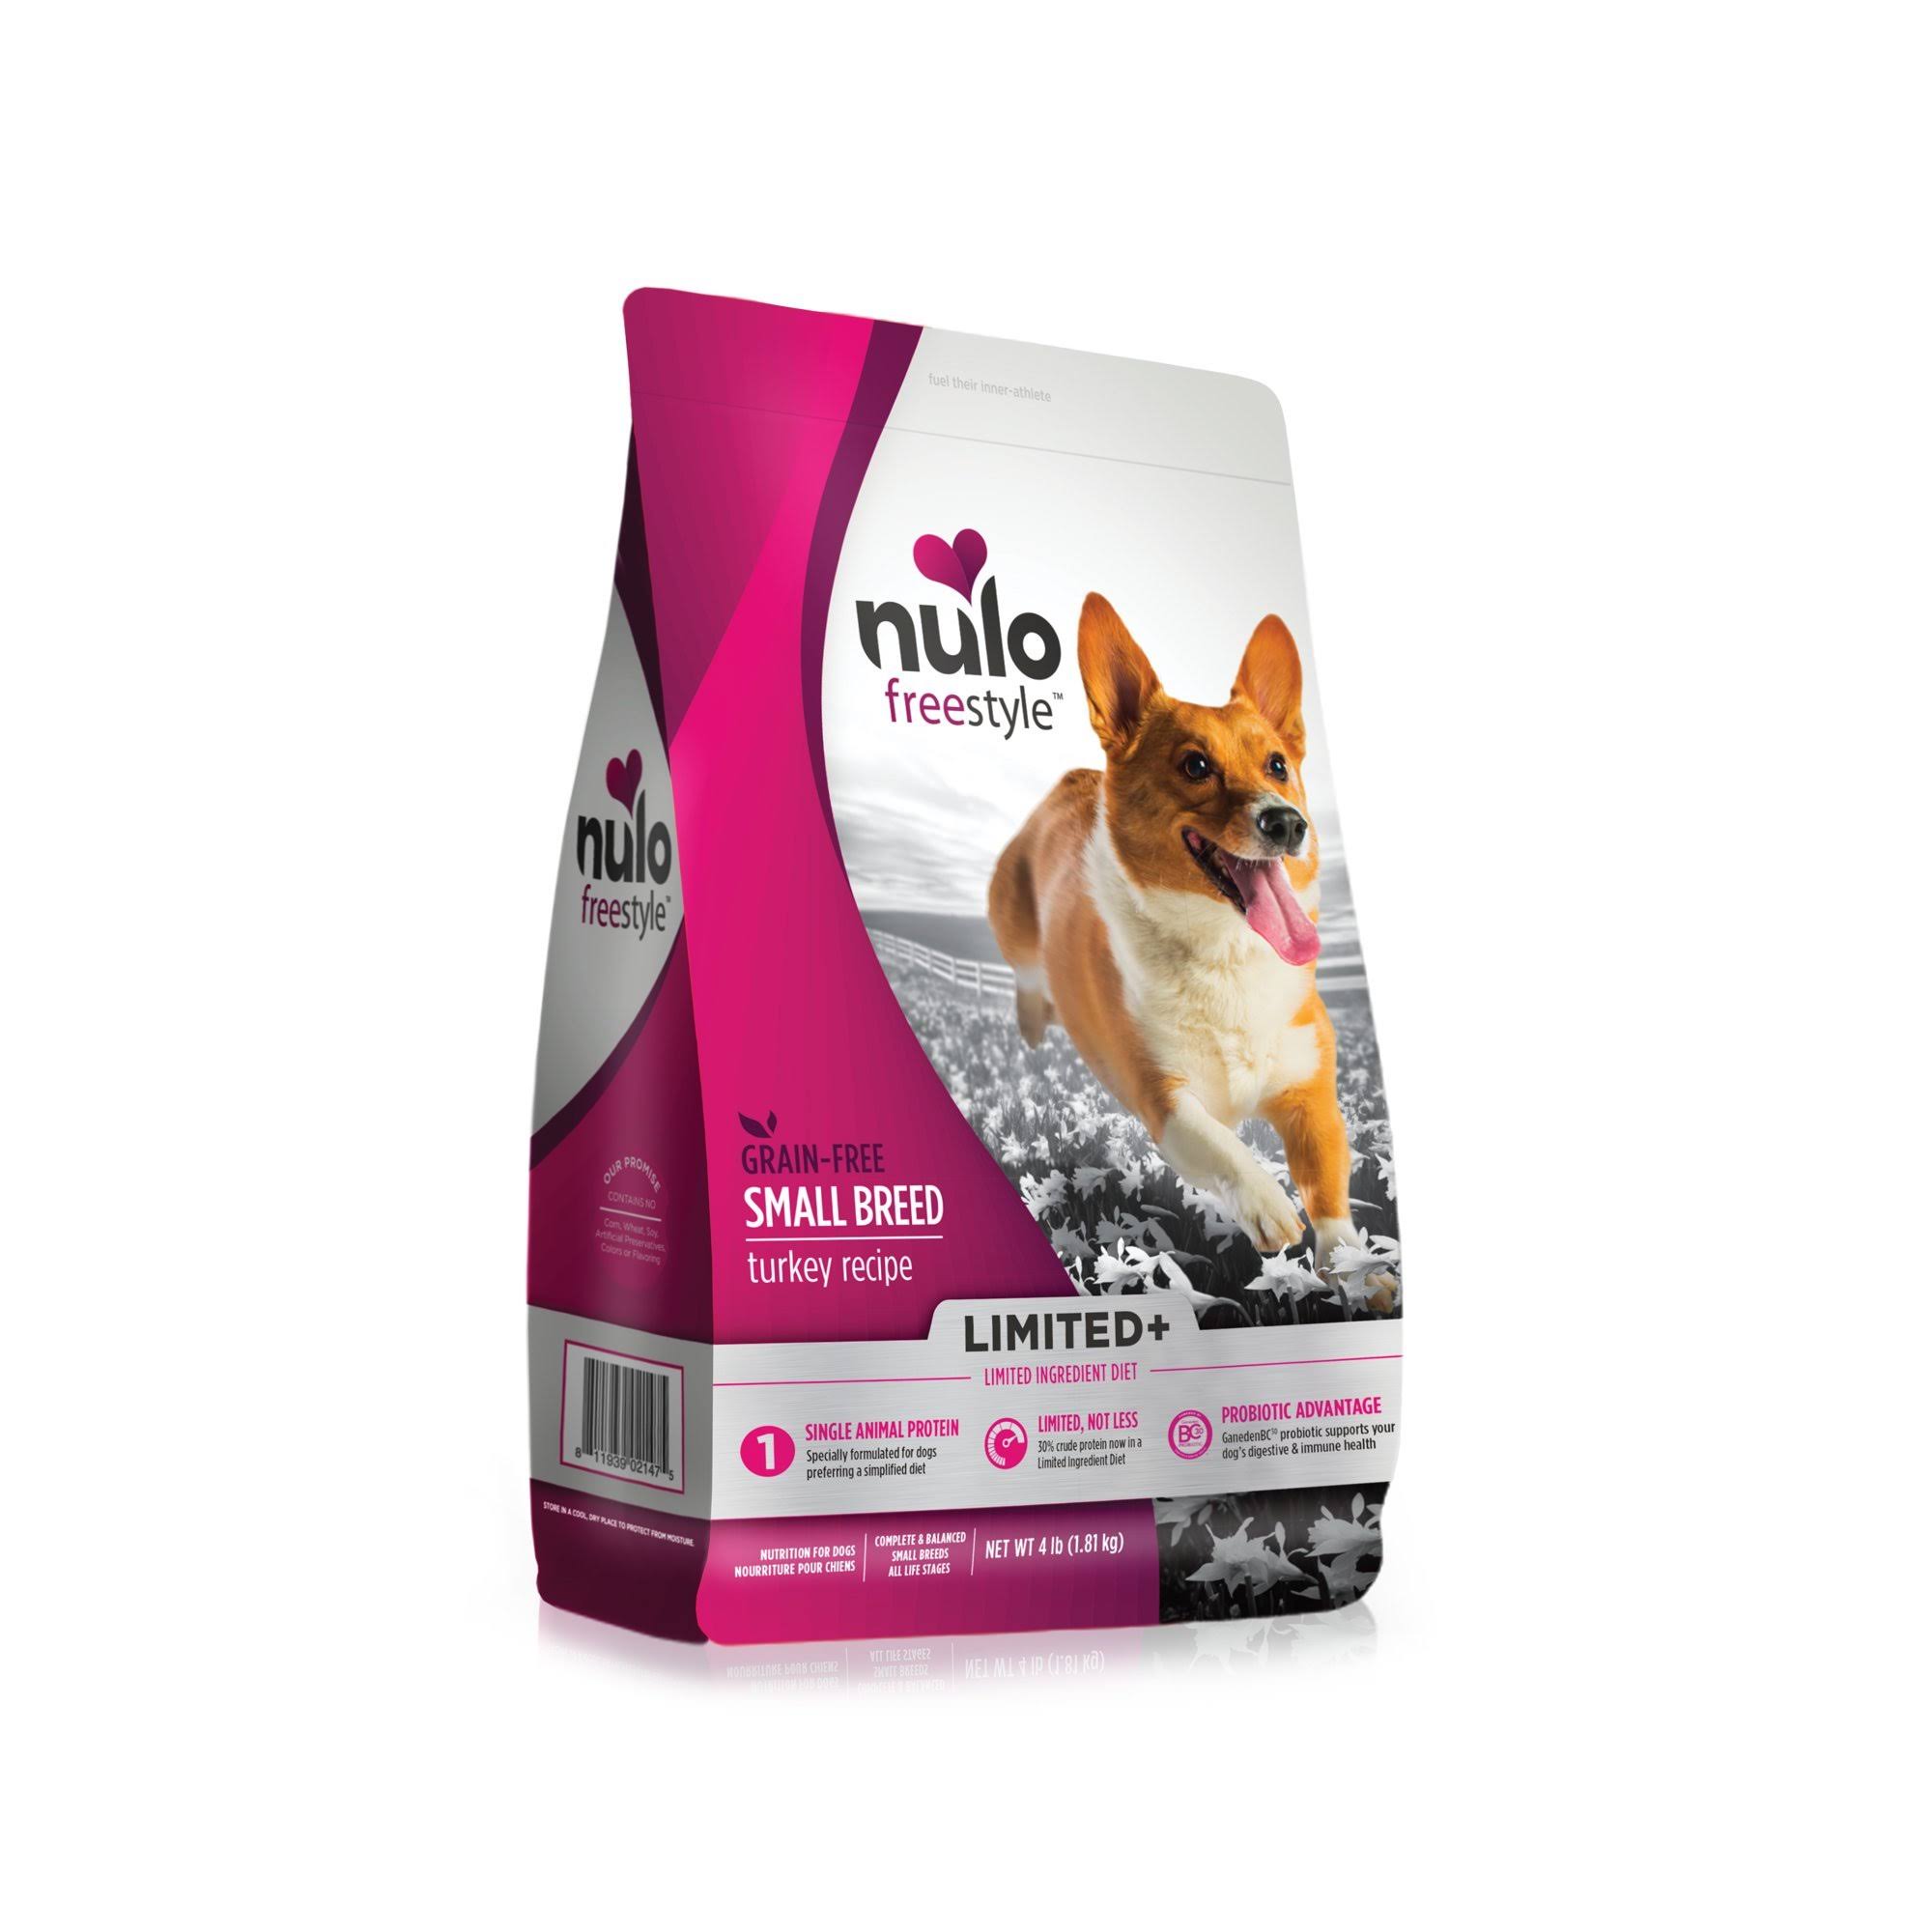 Nulo Freestyle Limited+ Grain Free Small Breed Turkey Dry Dog Food 4 lb